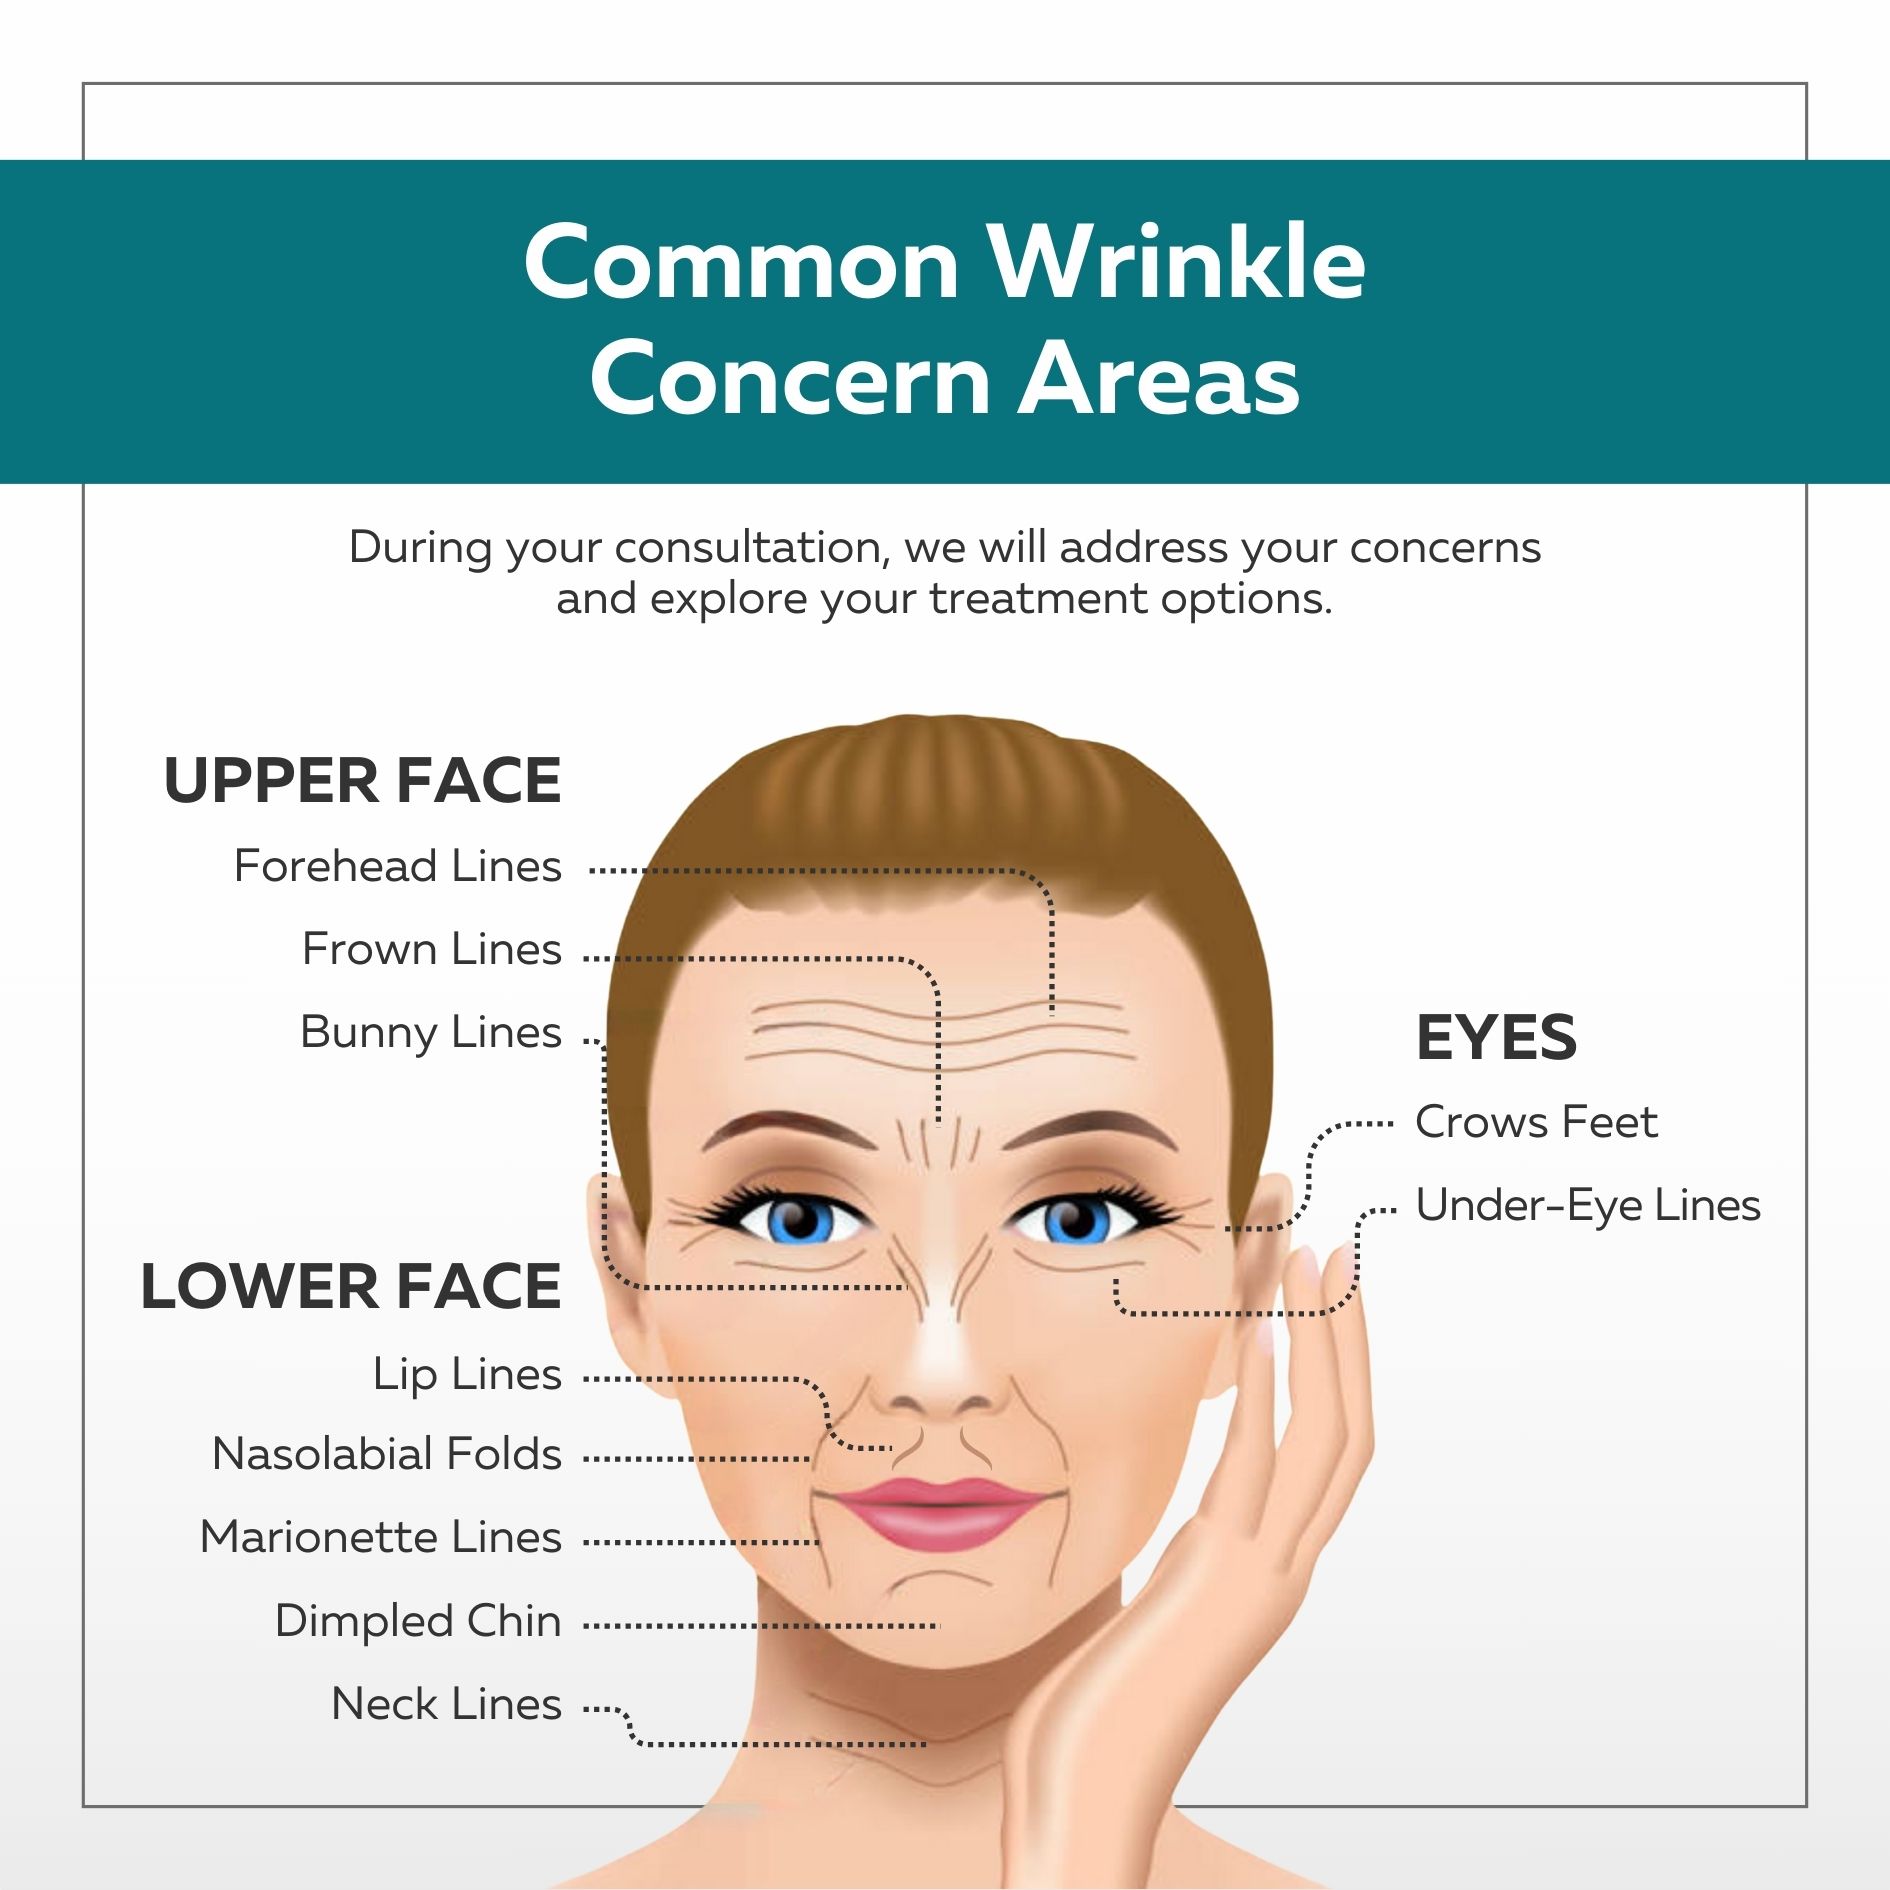 Labelled diagram of Woman's face with wrinkles, to depict common wrinkle concern areas